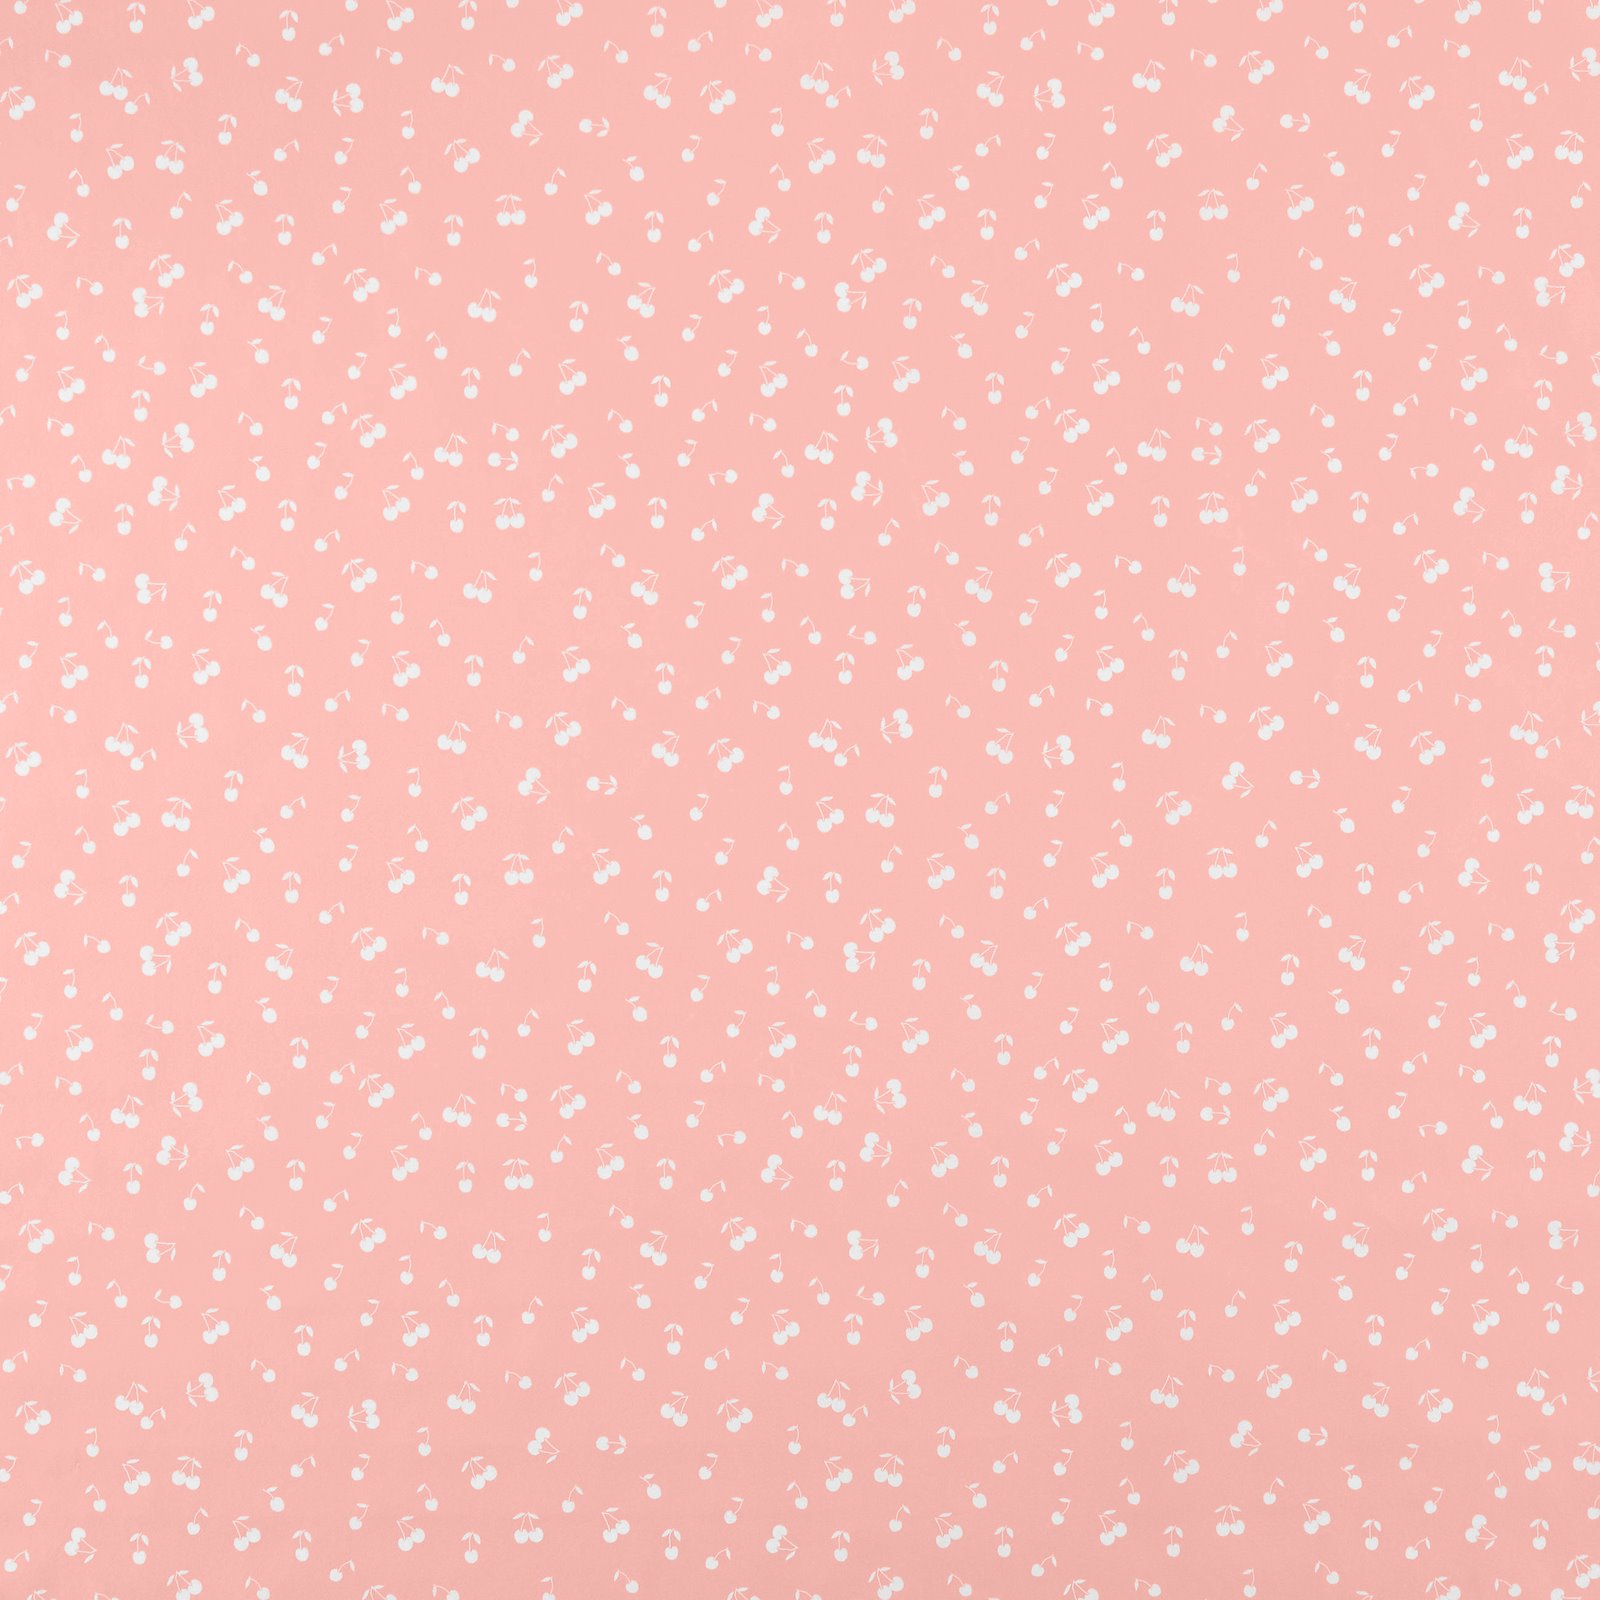 Non-woven oilcloth dusty pink w cherries 861731_pack_sp